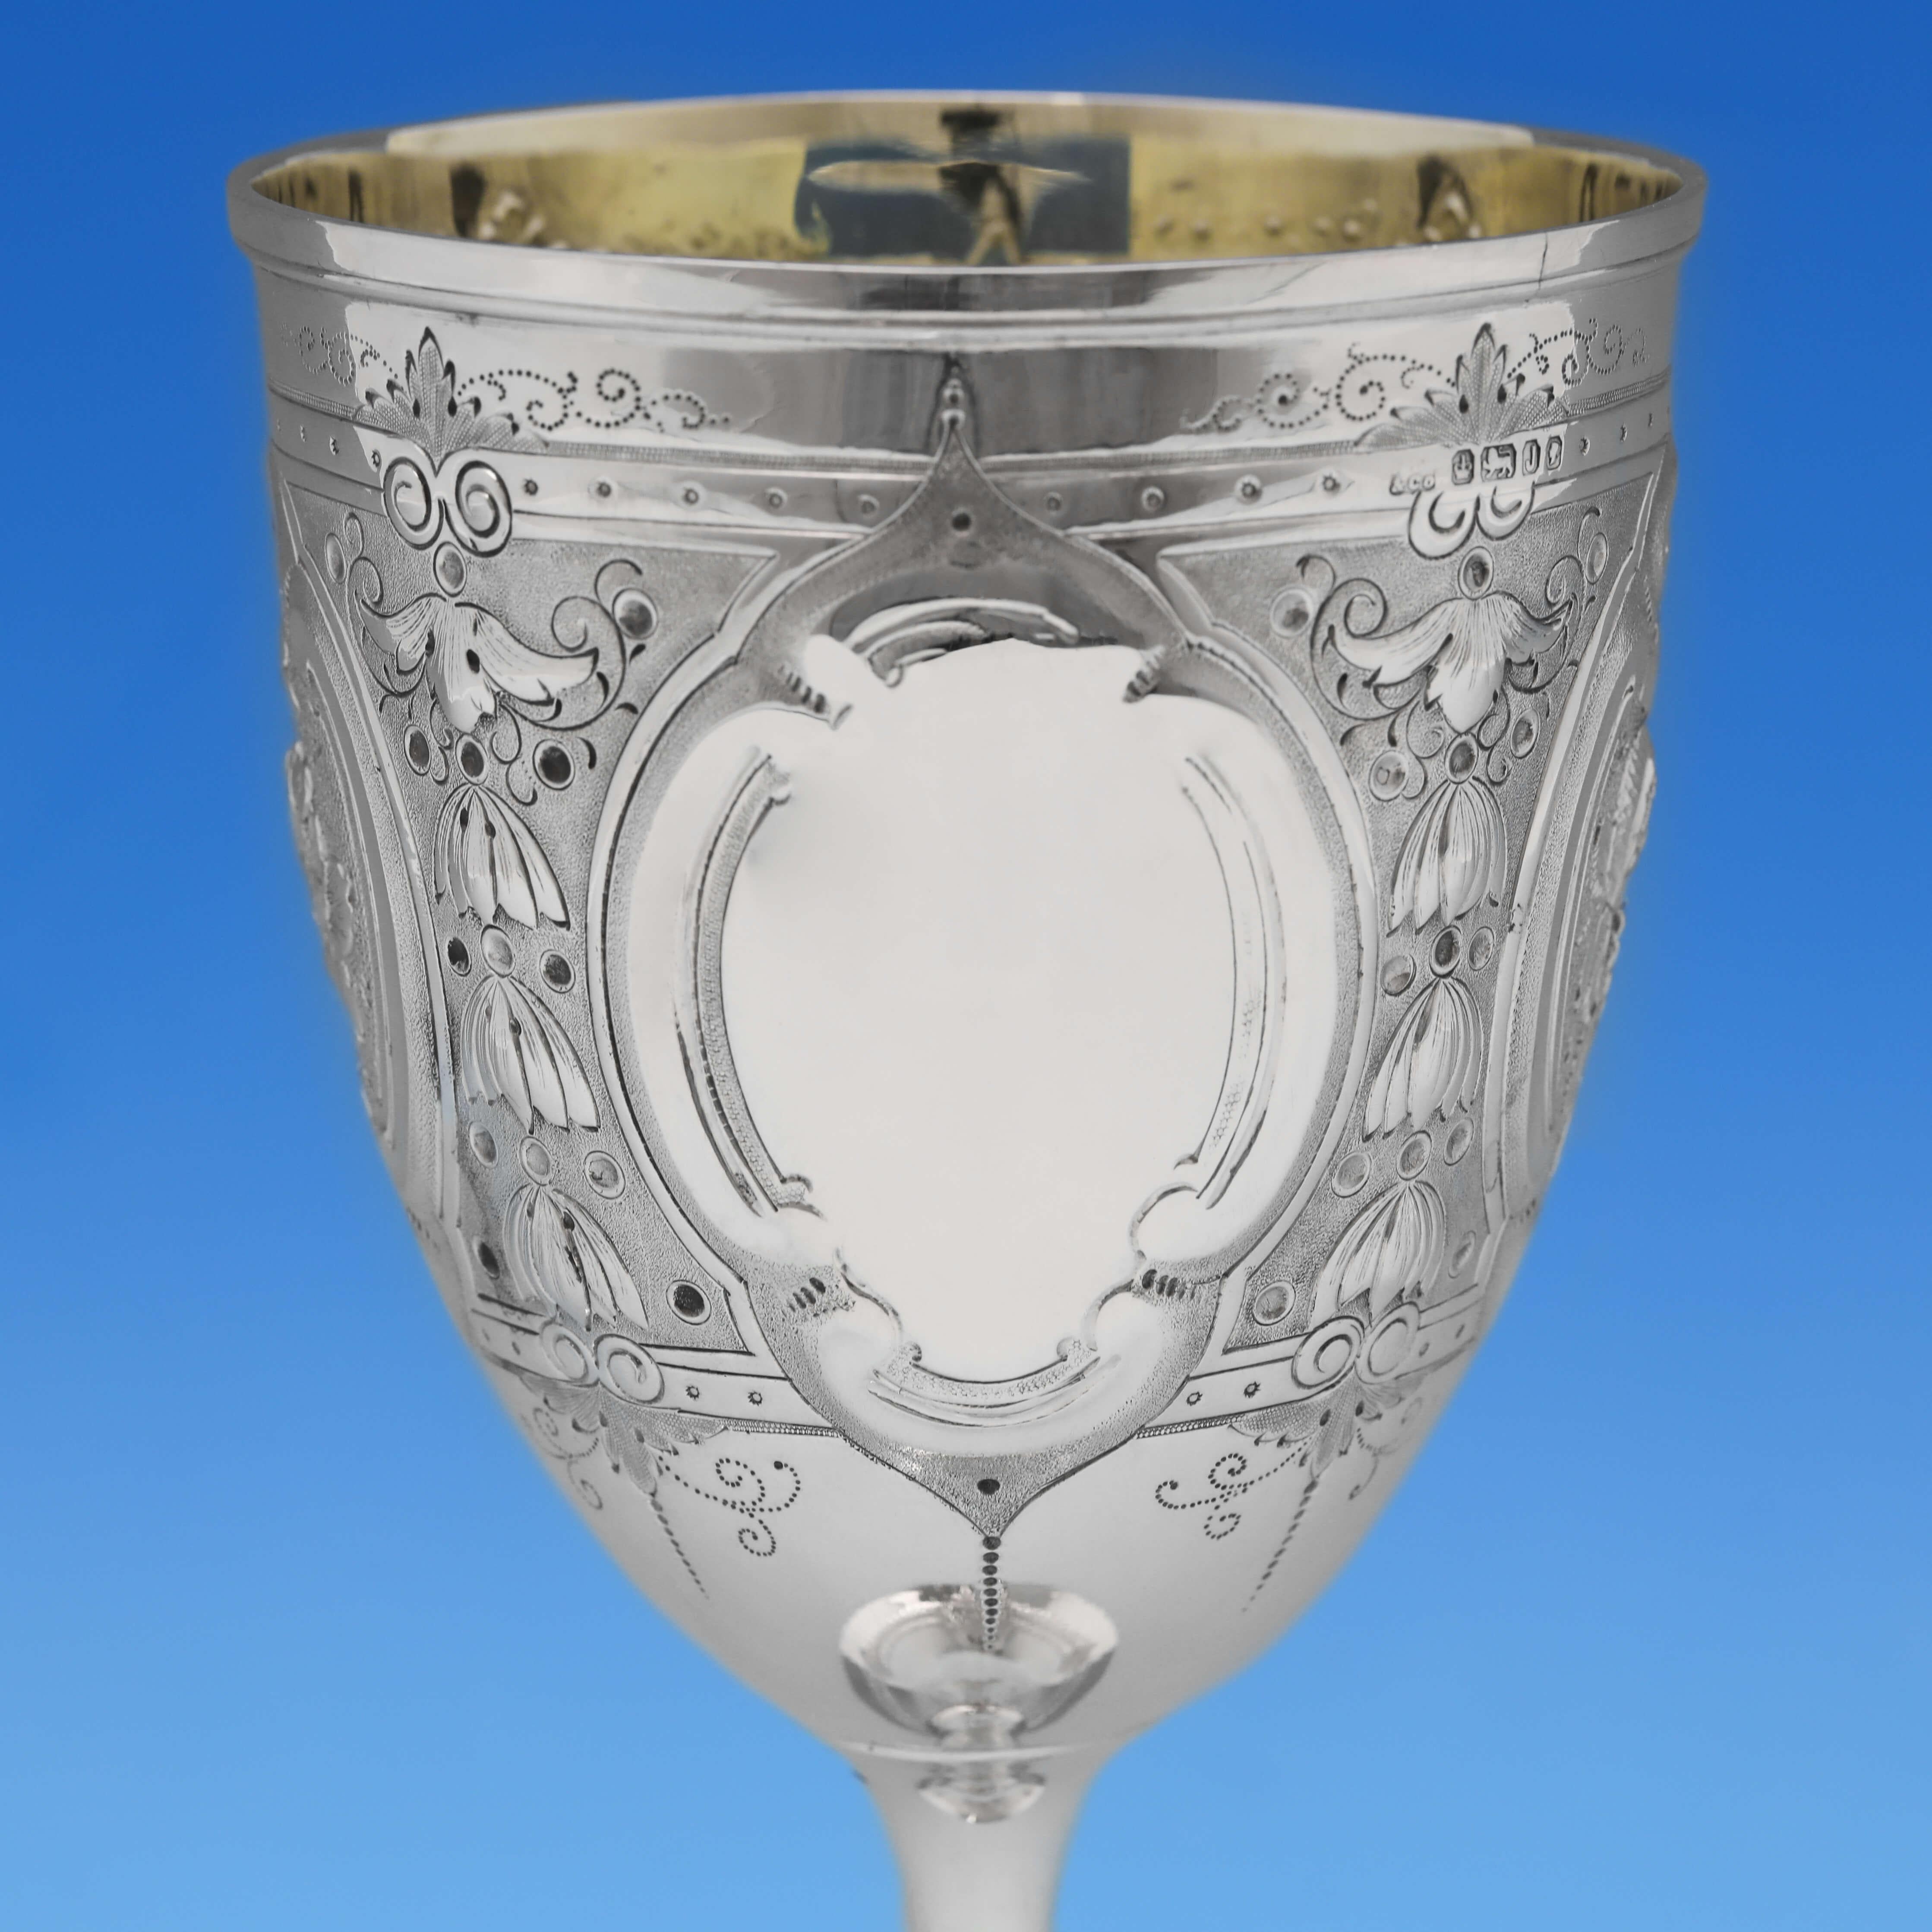 Hallmarked in Sheffield in 1876 by Henry Wilkinson & Co., this striking, Victorian, Antique Sterling Silver Goblet, features wonderful chased and engraved decoration, and a gilt interior. The goblet measures 8.5